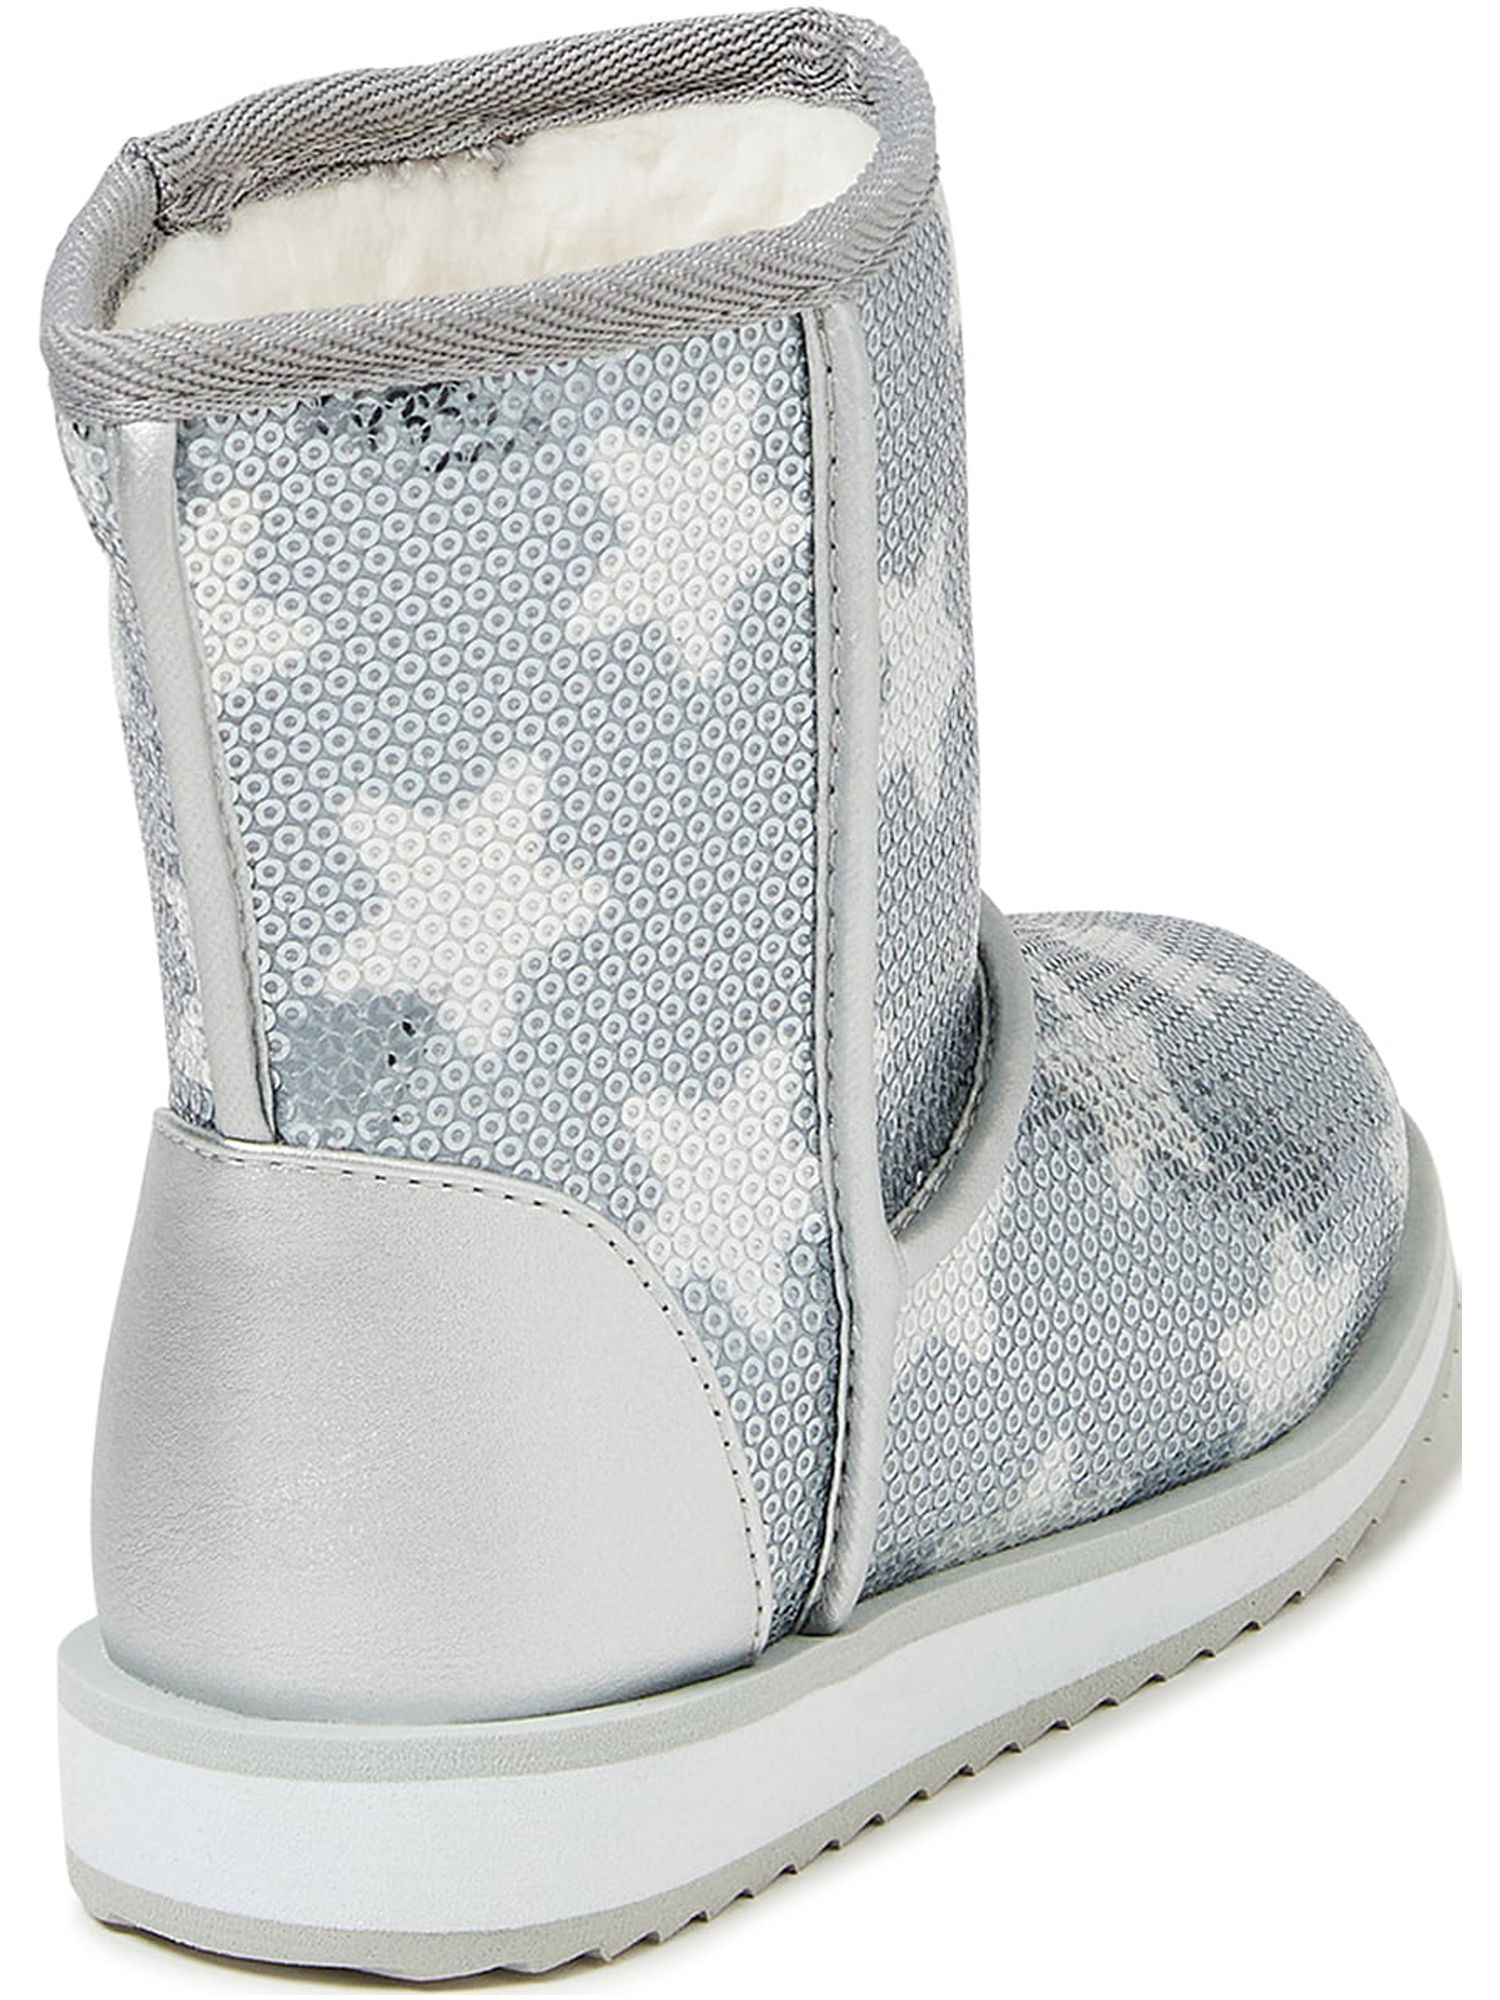 Wonder Nation Little & Big Girl Sequin Faux Shearling Winter Boot, Sizes 13-6 - image 3 of 6